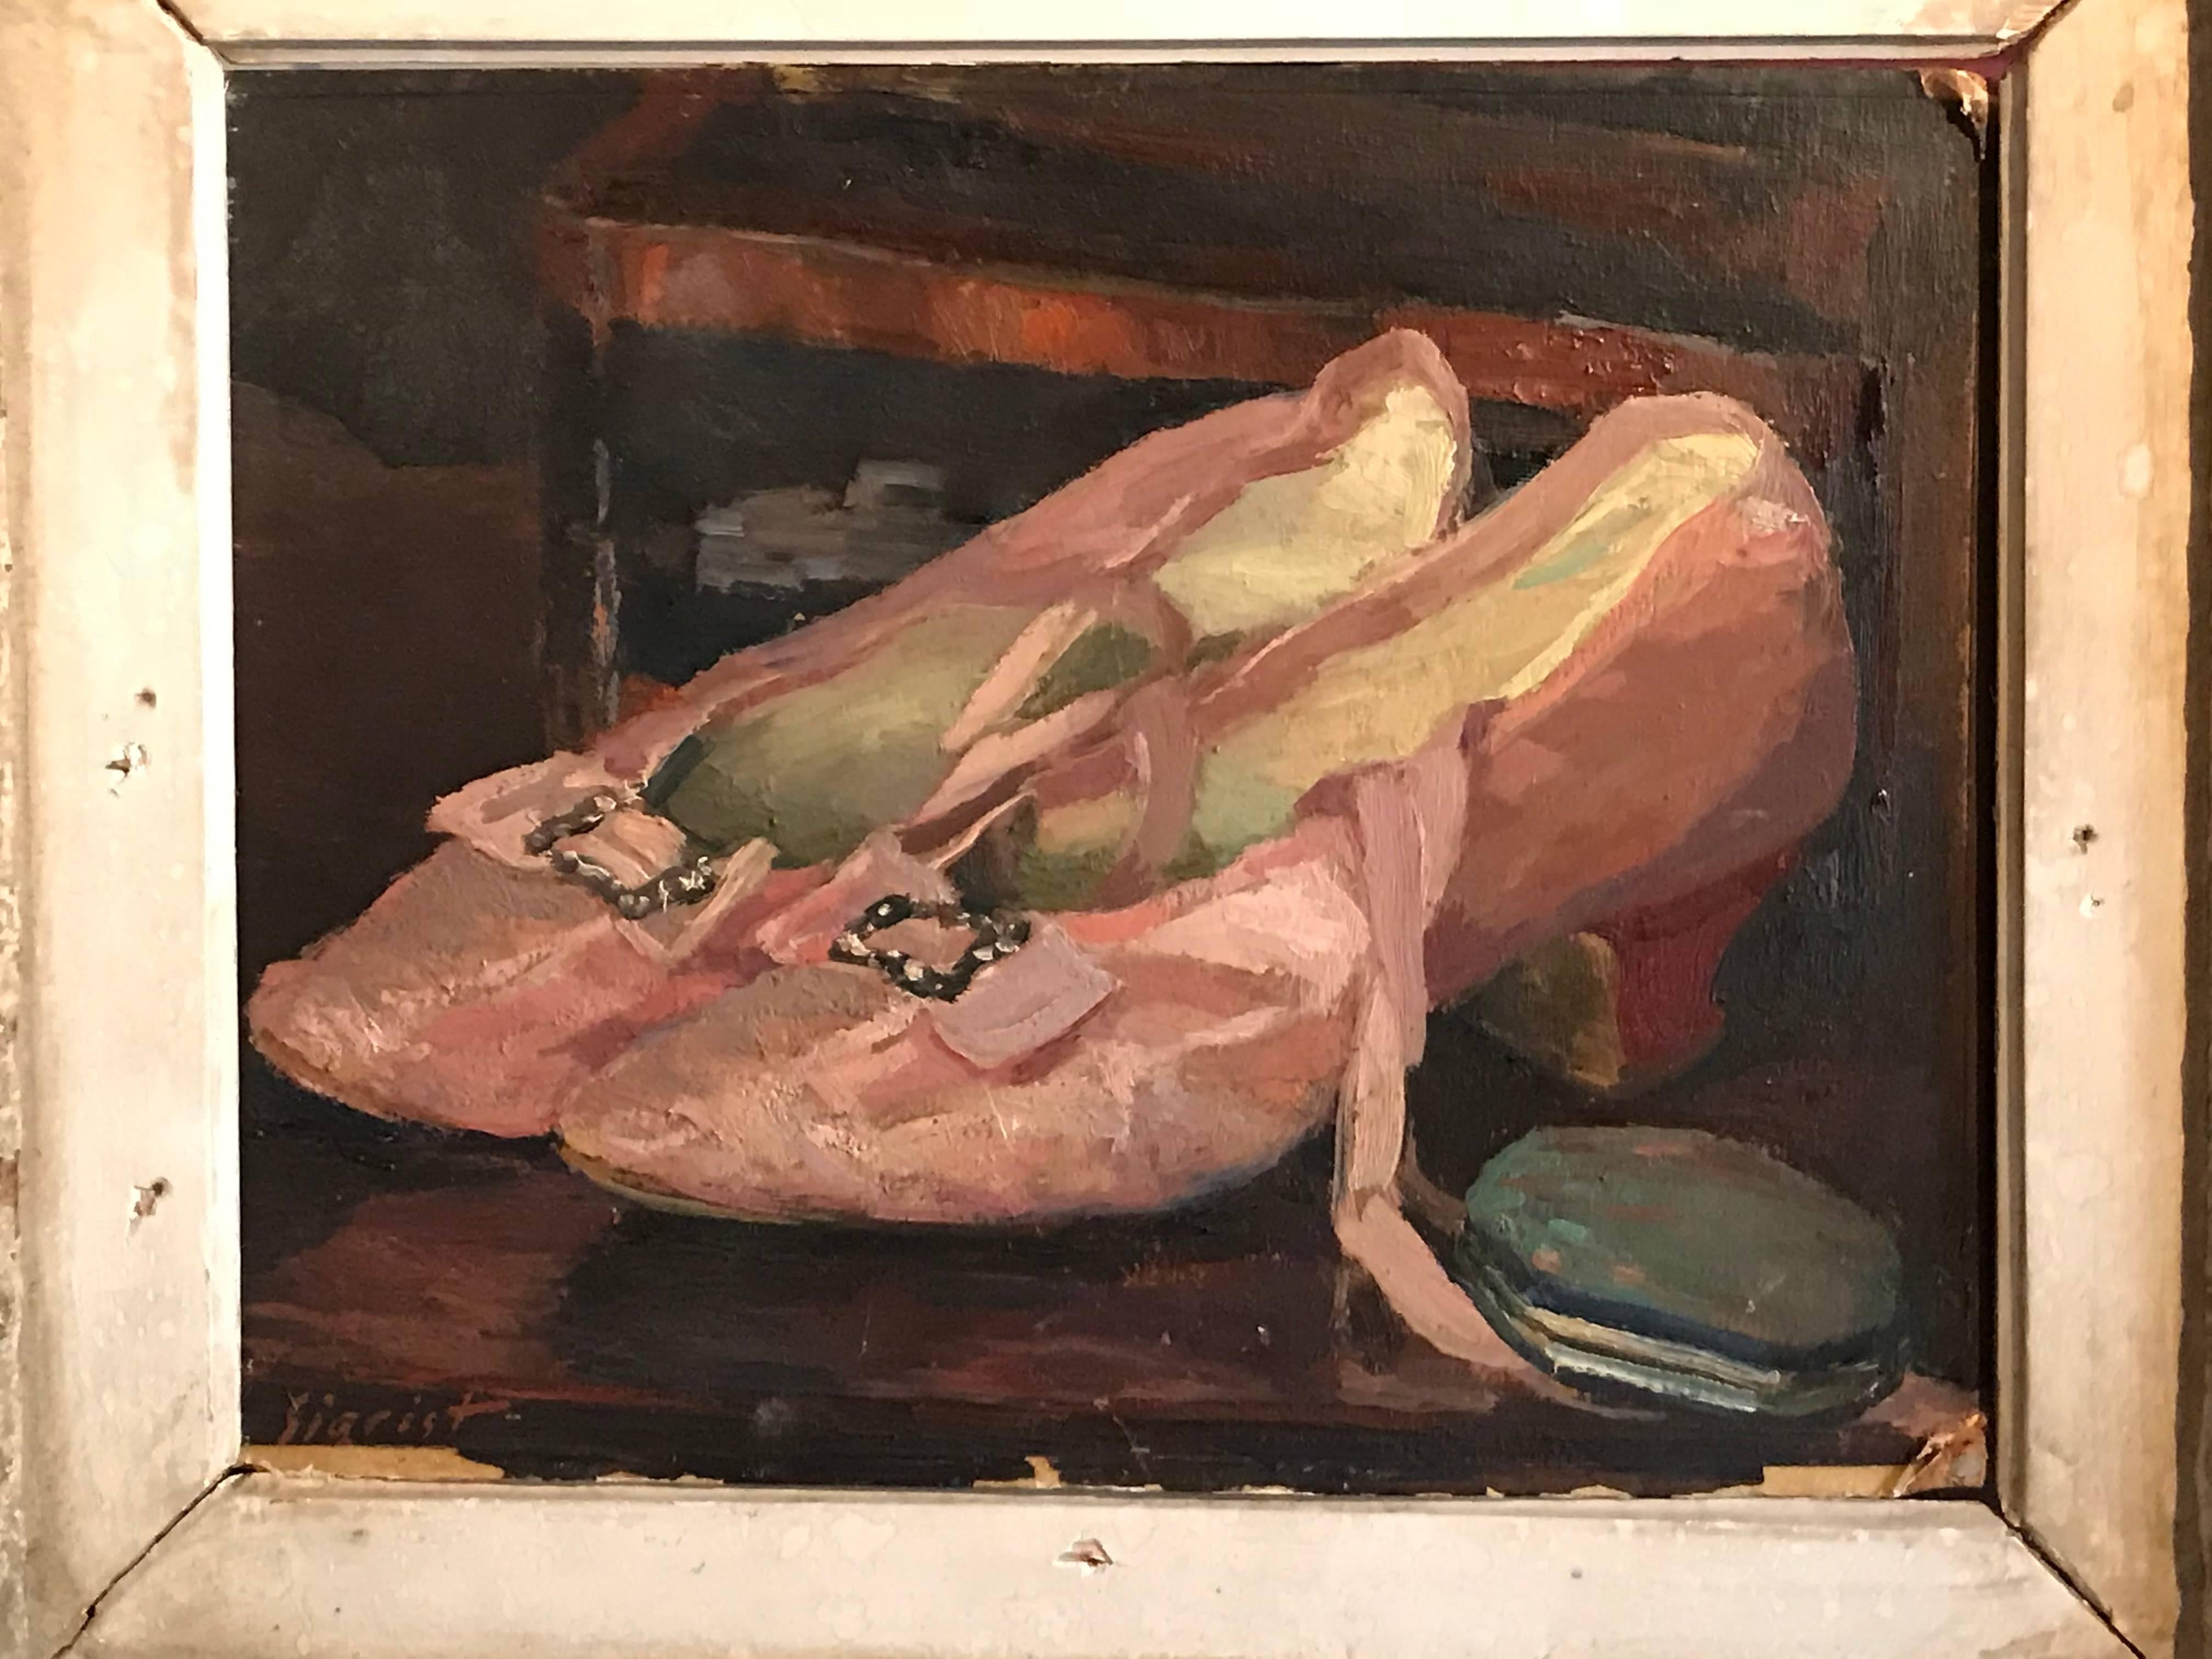 The Pink Satin Shoes - Authentic French Impressionist Oil Painting - Black Figurative Painting by Edmond Sigrist